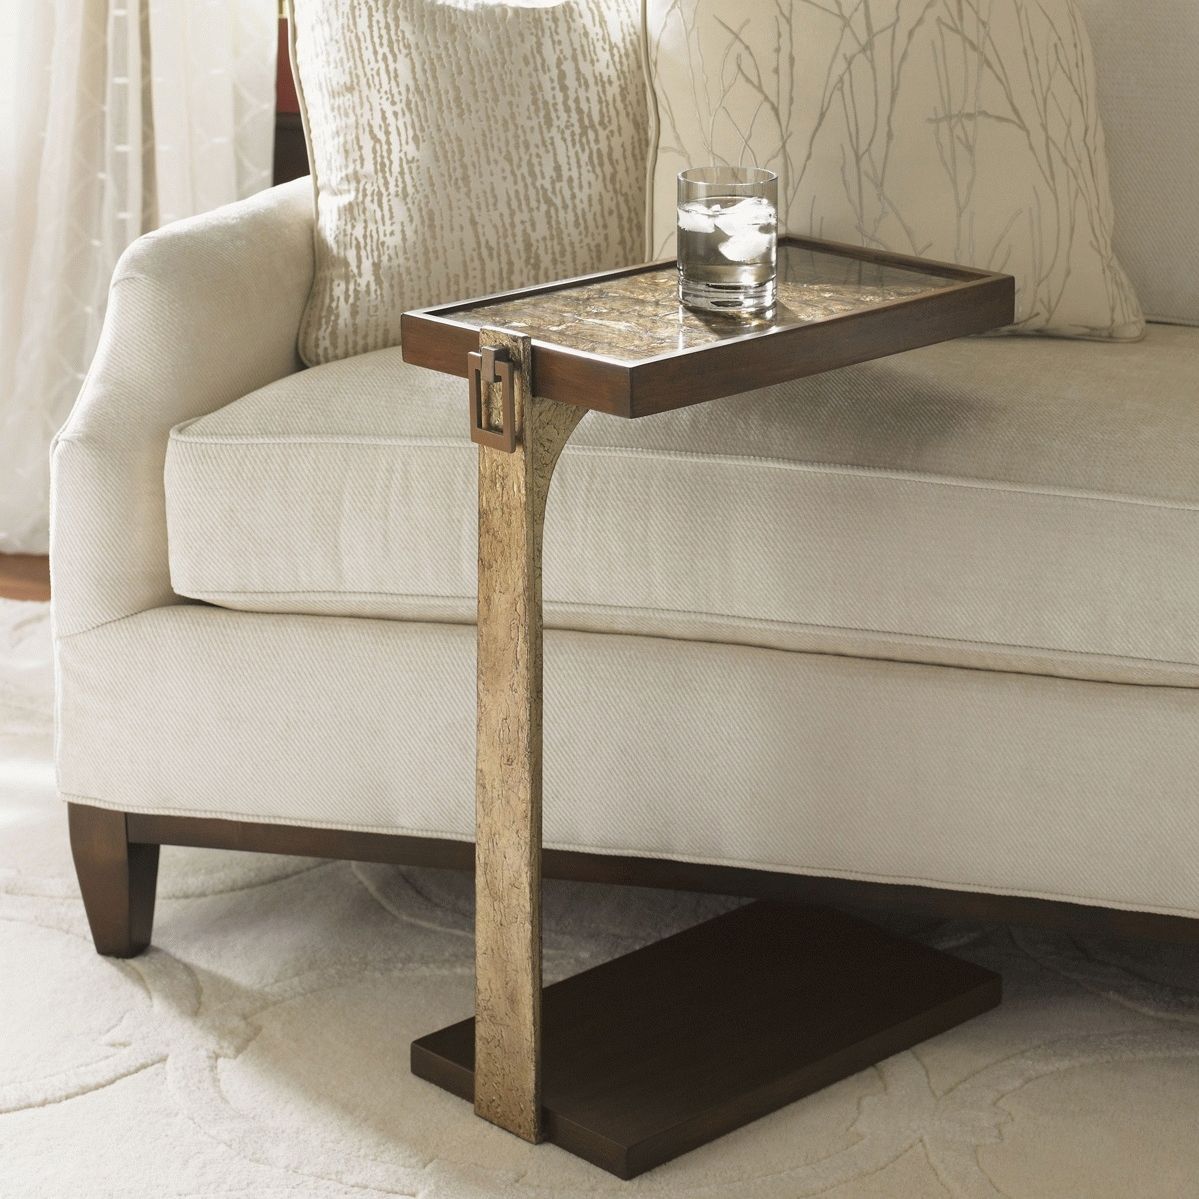 Small Table | Small Tables | End Table | Side Table | Side Tables With Regard To Narrow Sofa Tables (Photo 23 of 23)